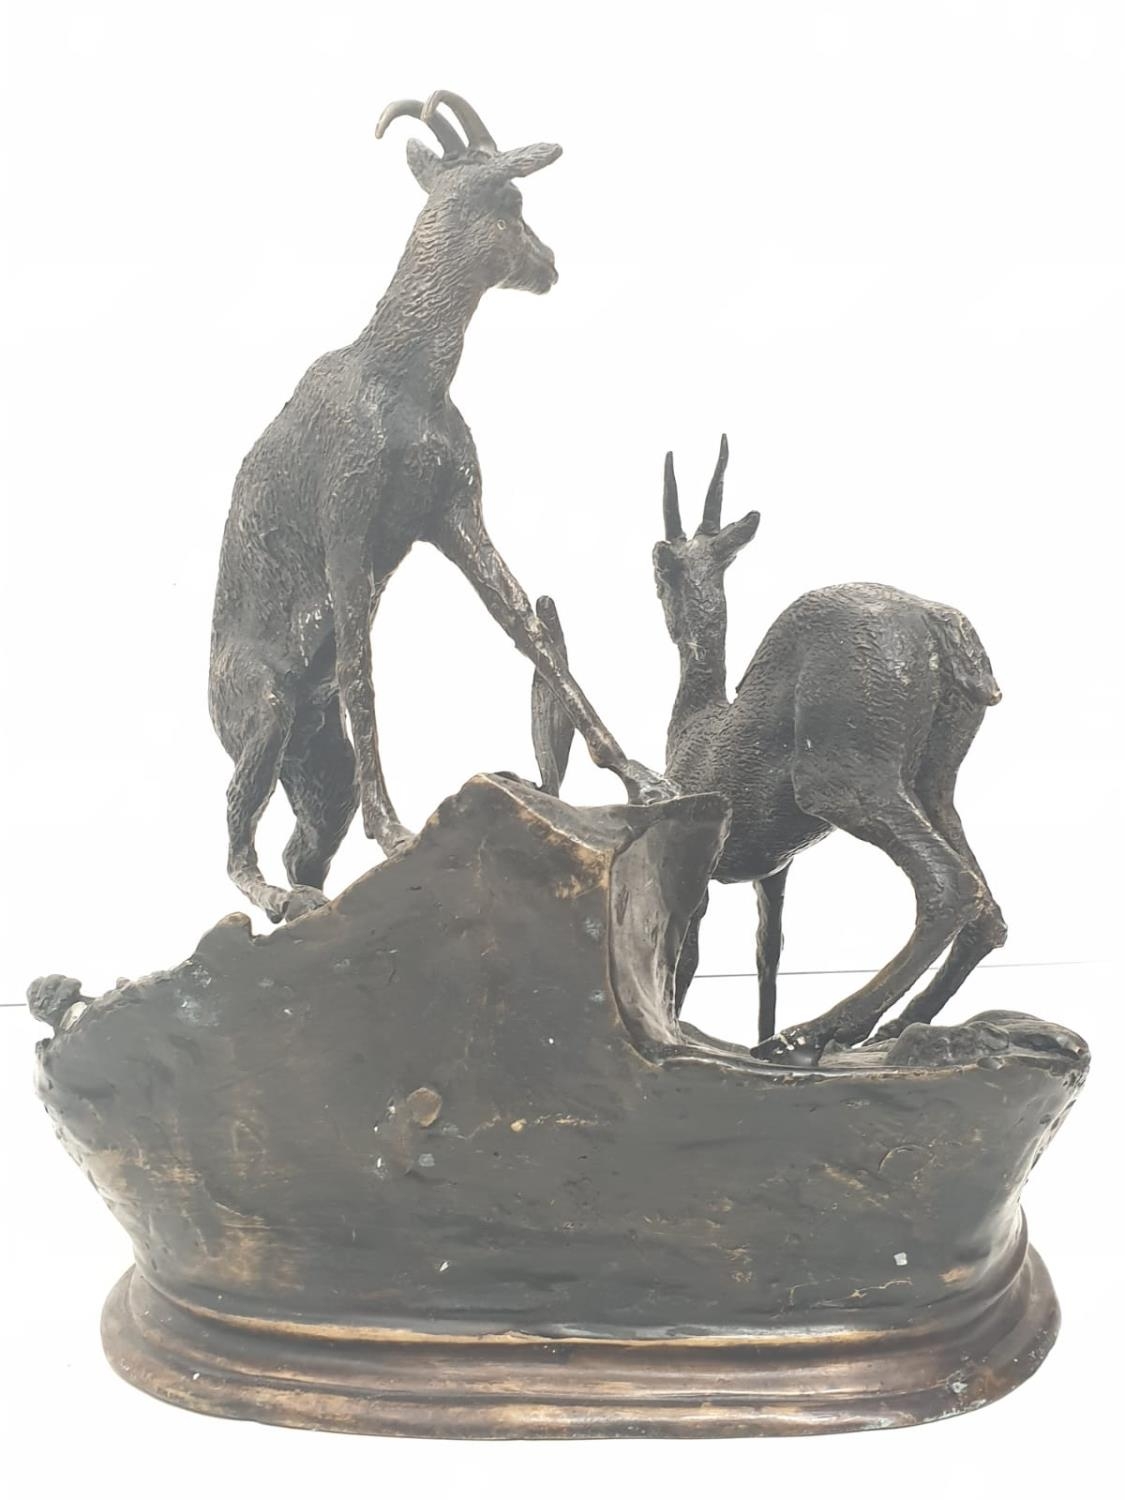 A vintage bronze sculpture of two deer, alert to the danger around them. 25 x 30 cm. - Image 4 of 7